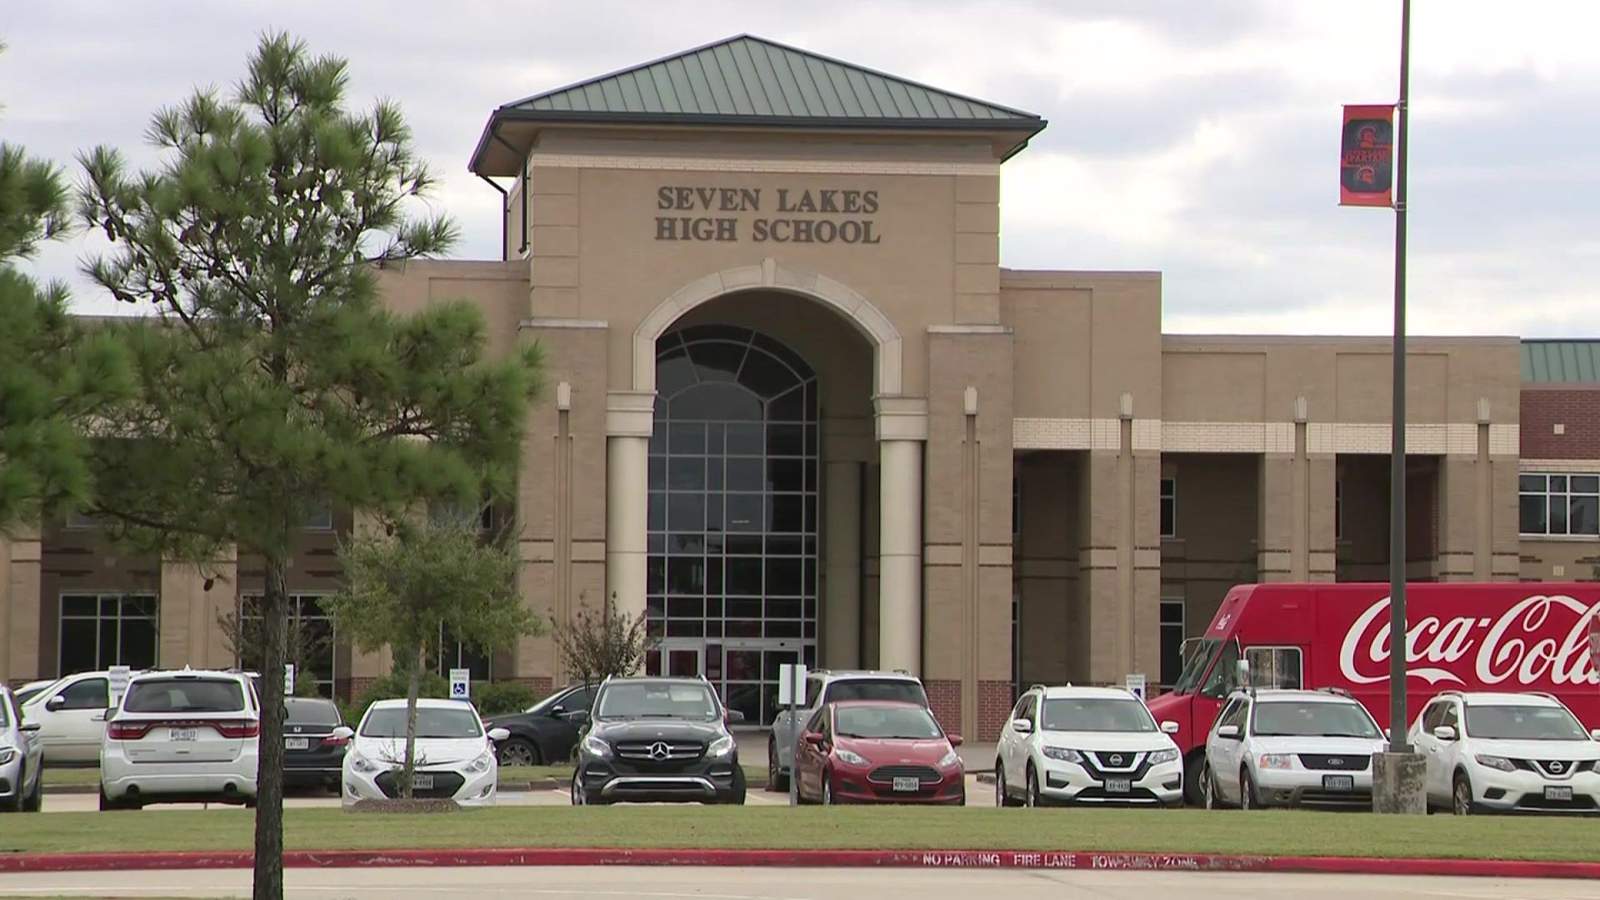 Seven Lakes High School to temporarily halt in-person classes after 40+ COVID-19 cases on campus